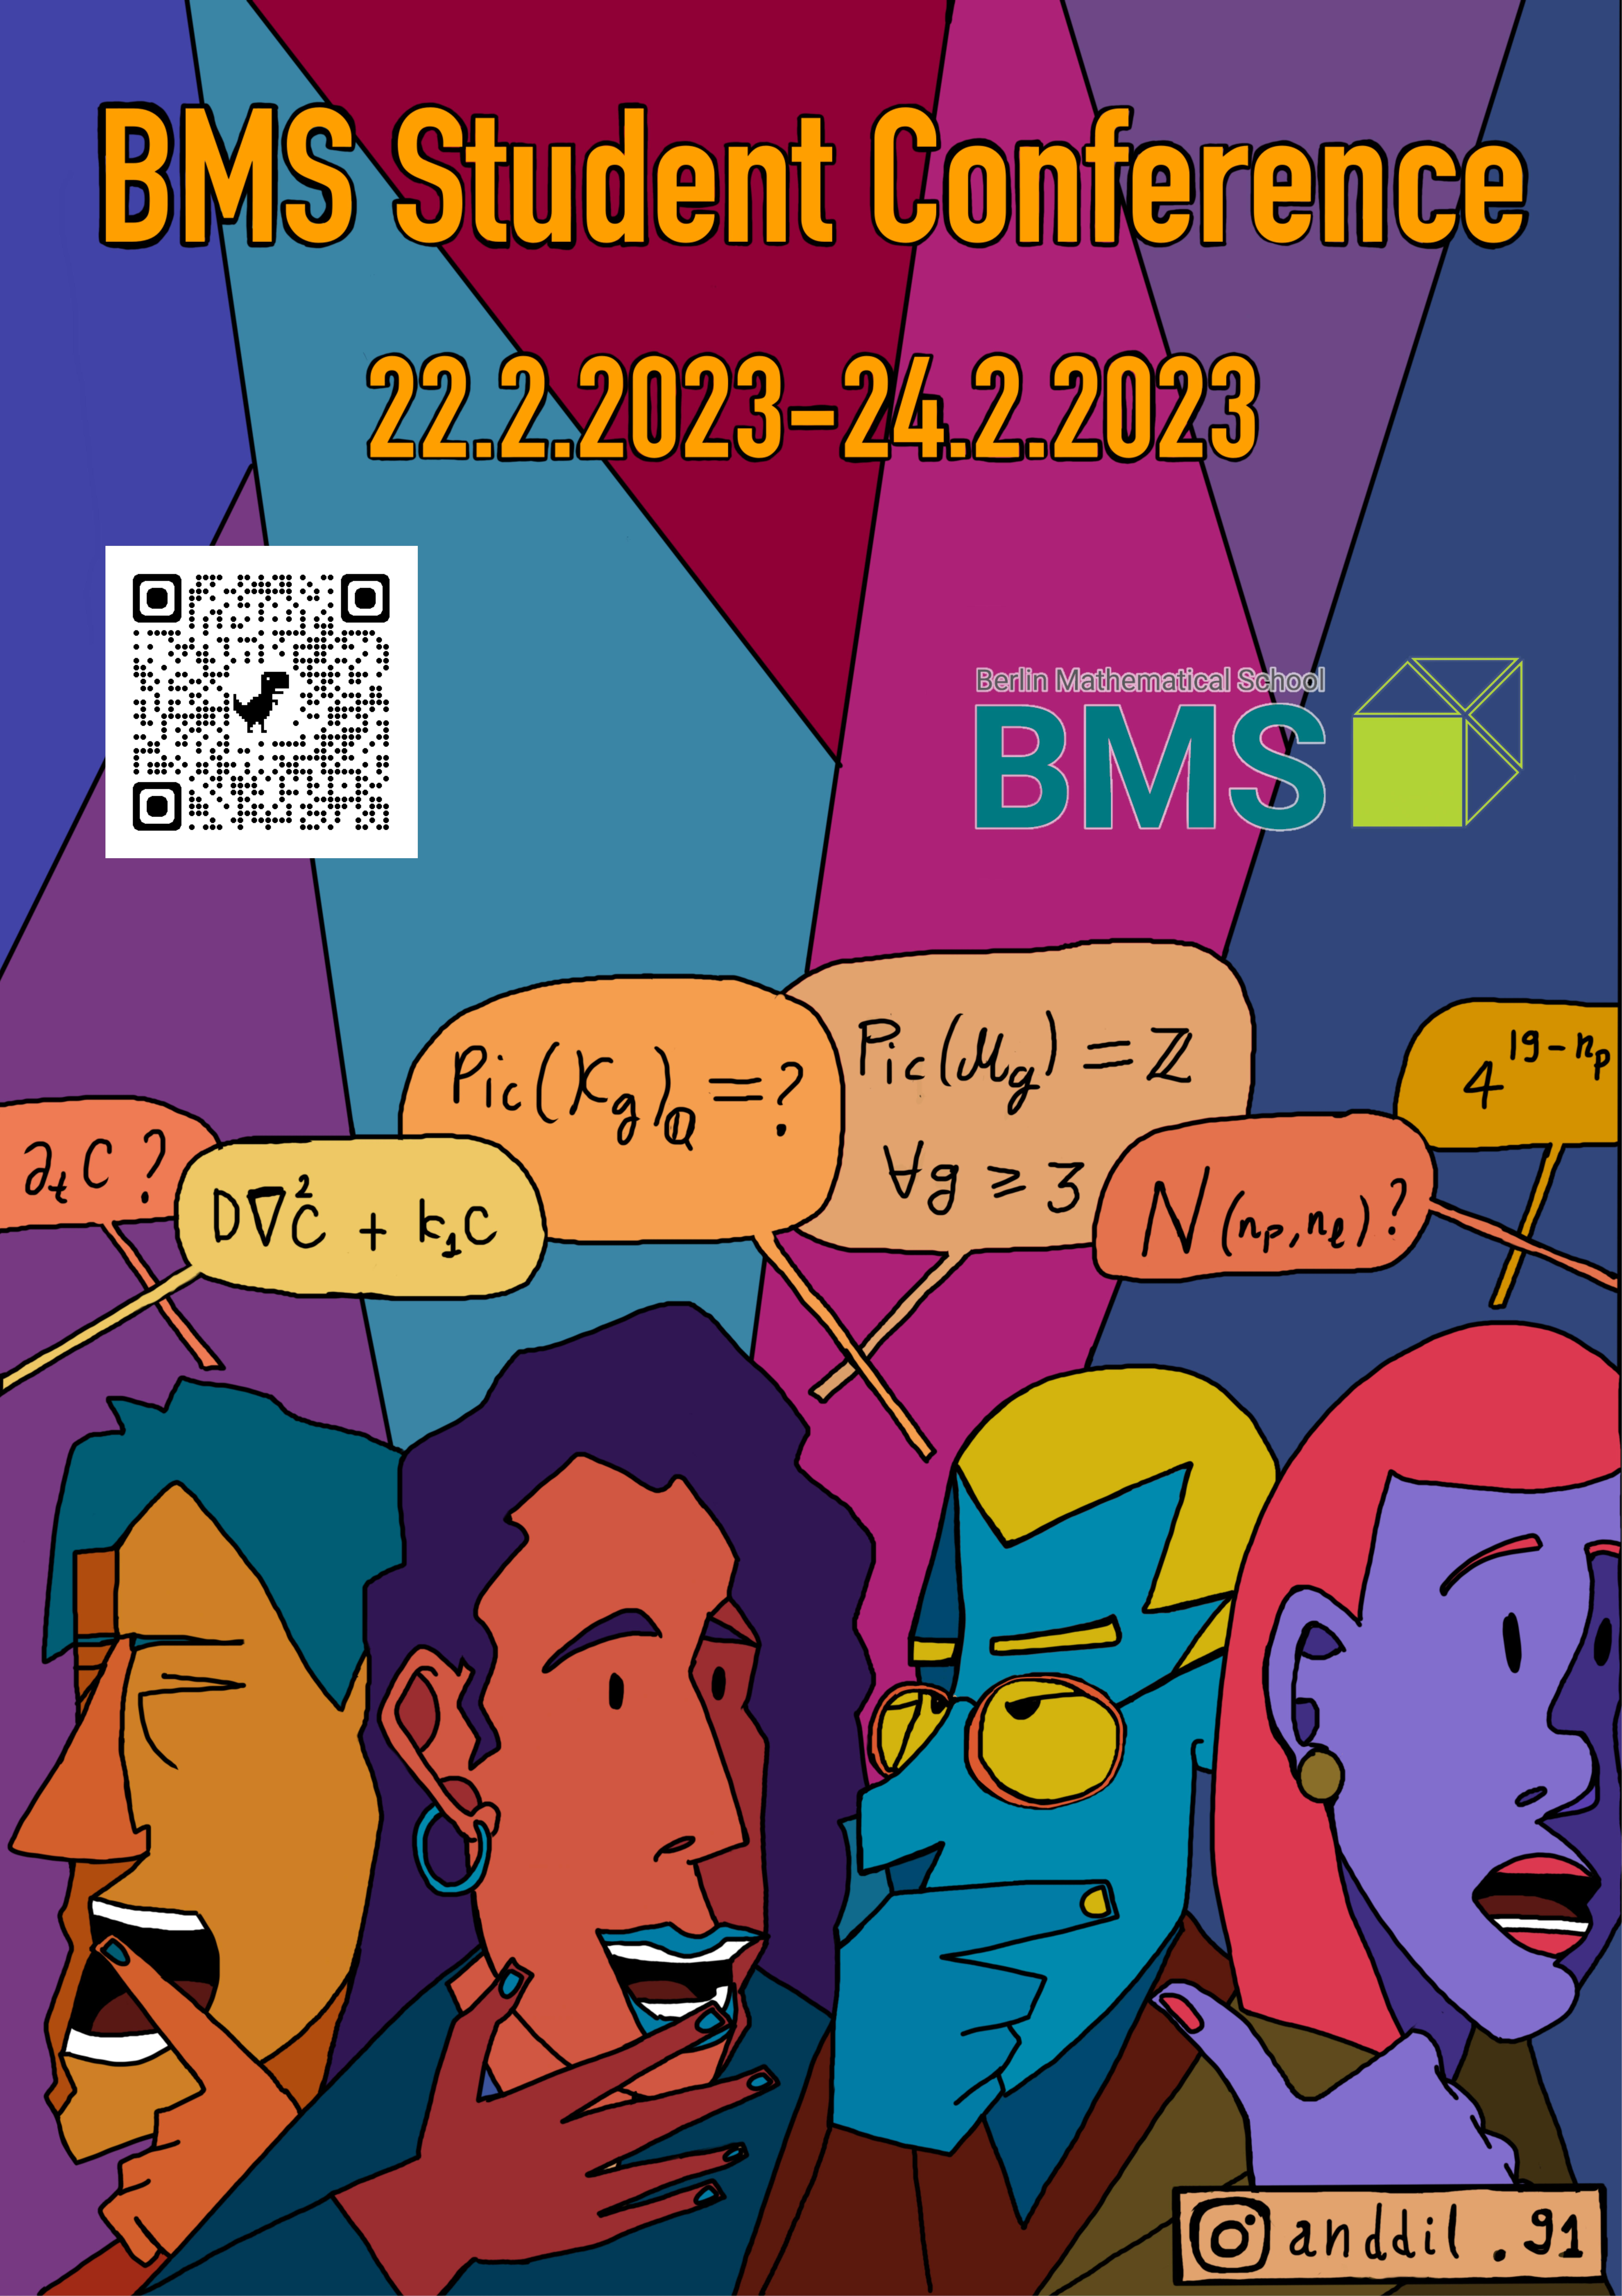 Conference Poster (small)